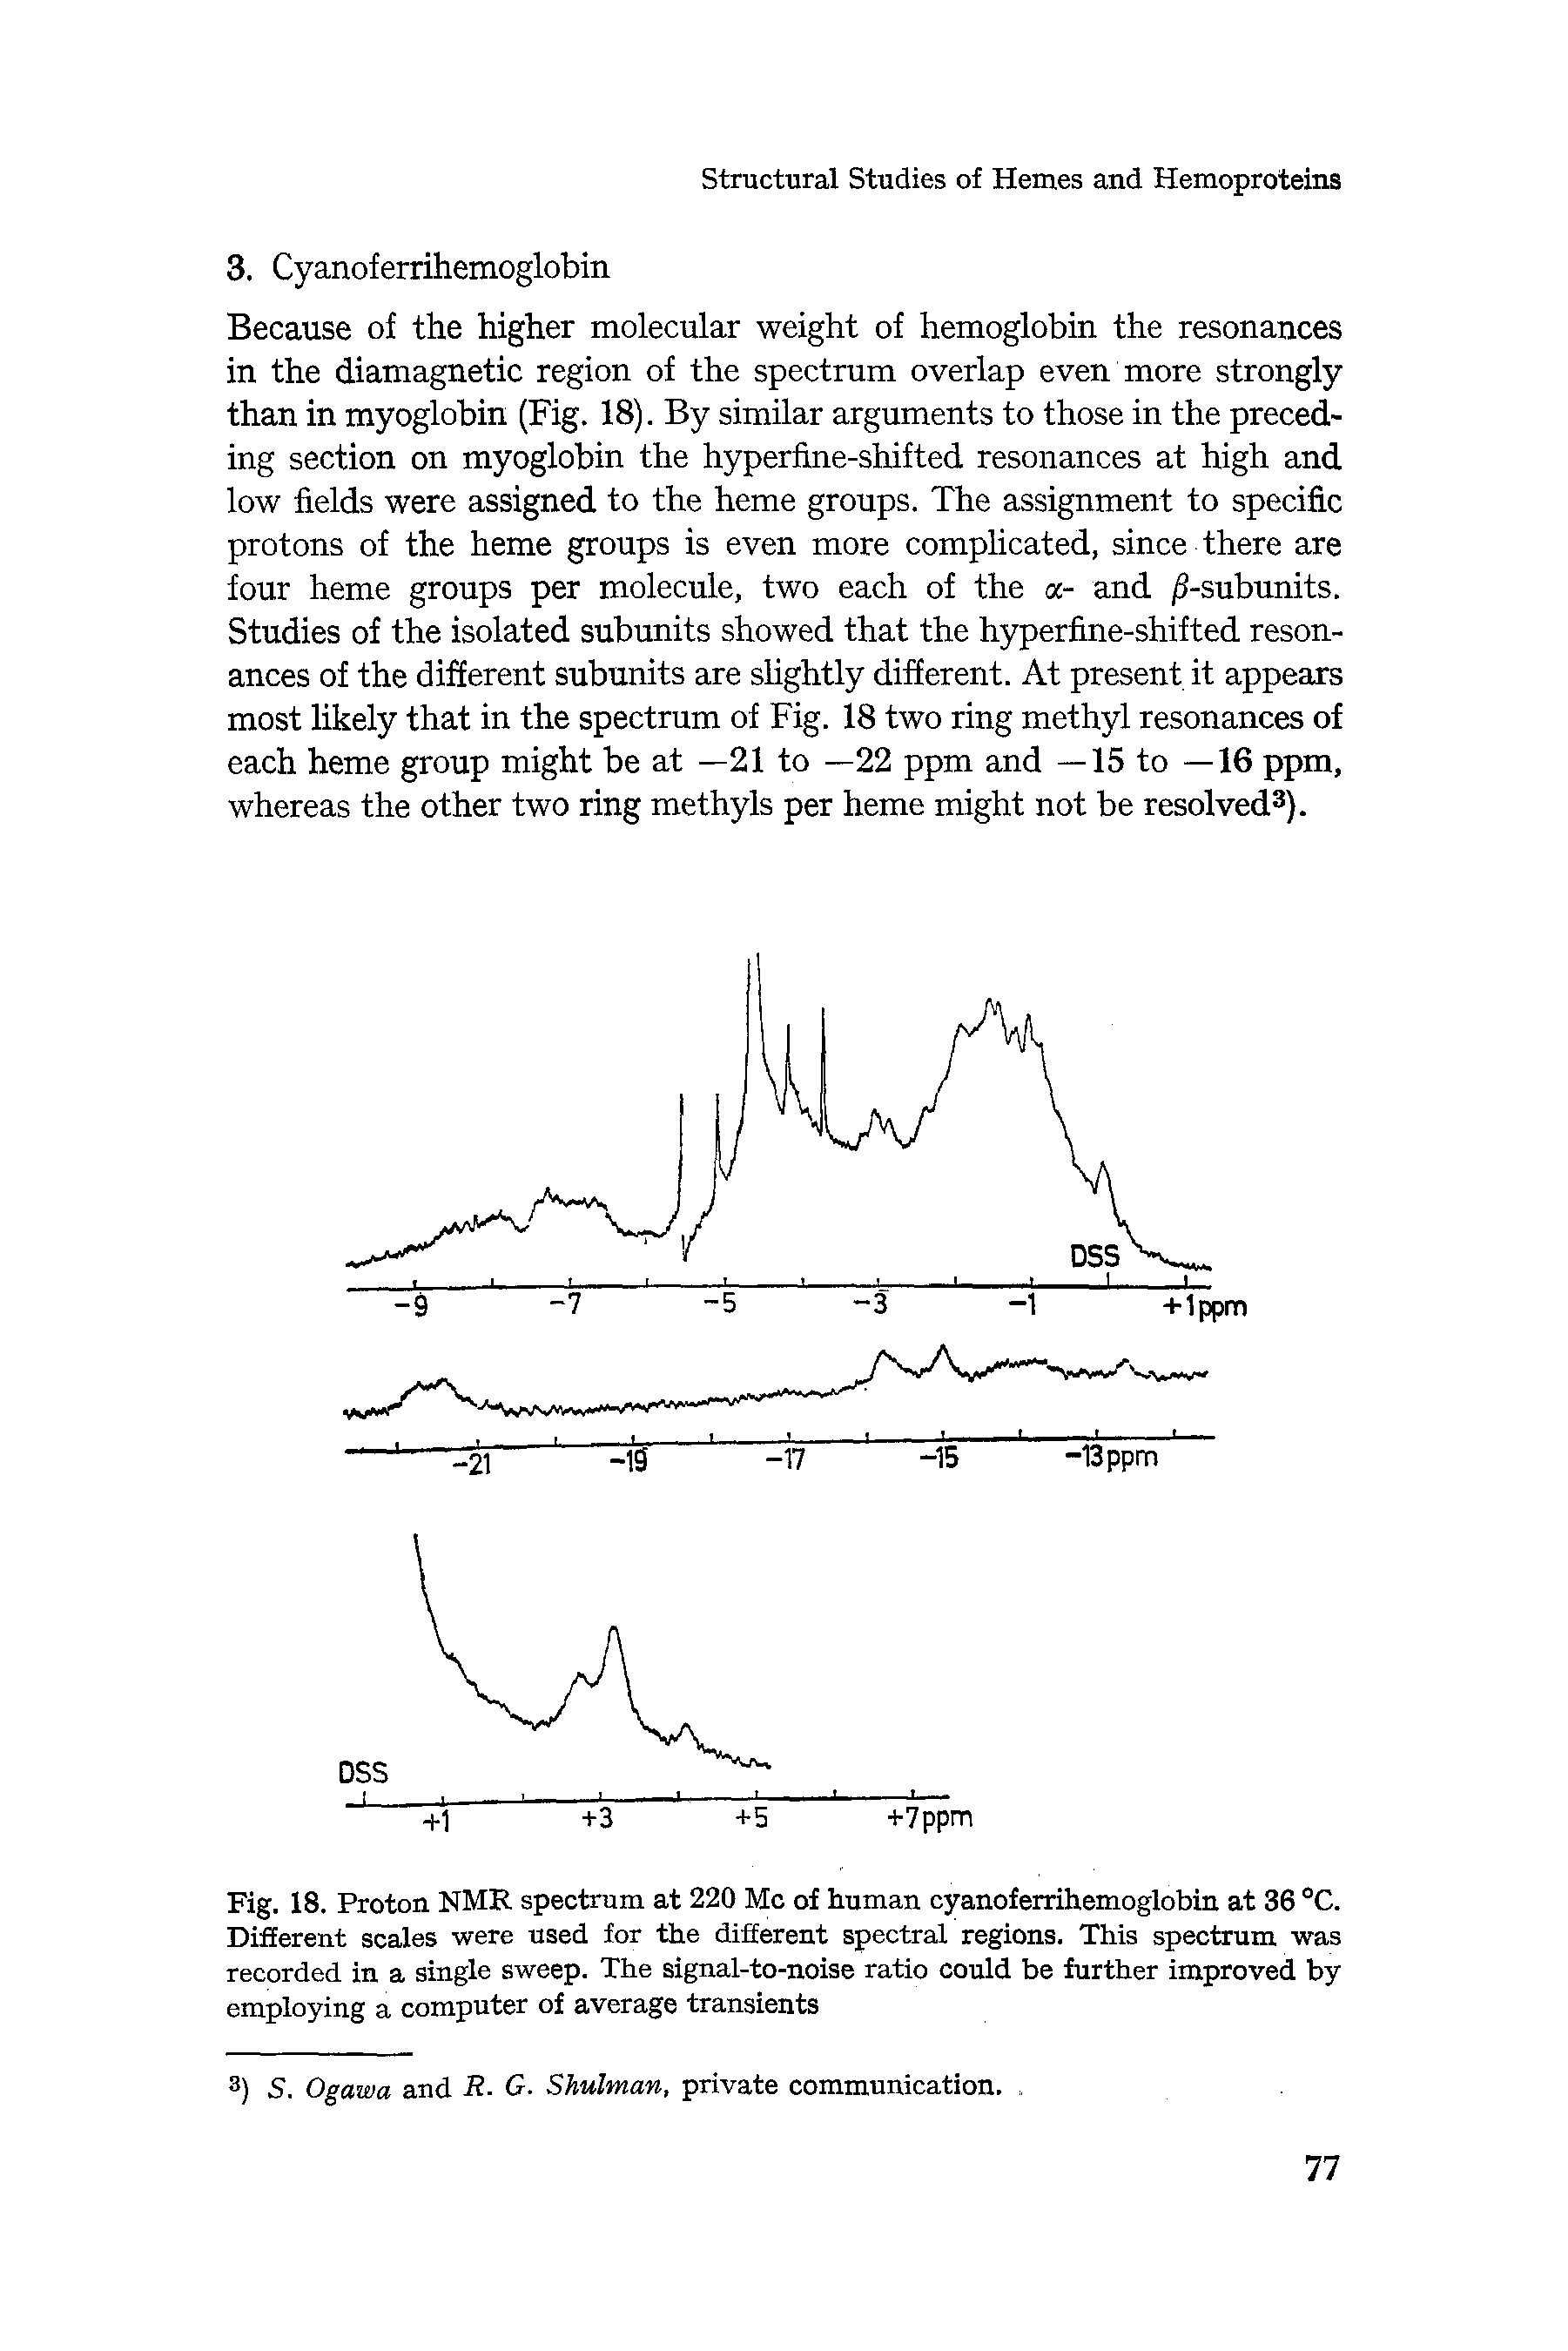 Fig. 18. Proton NMR spectrum at 220 Me of human cyanoferrihemoglobin at 36 °C. Different scales were used for the different spectral regions. This spectrum was recorded in a single sweep. The signal-to-noise ratio could be further improved by employing a computer of average transients...